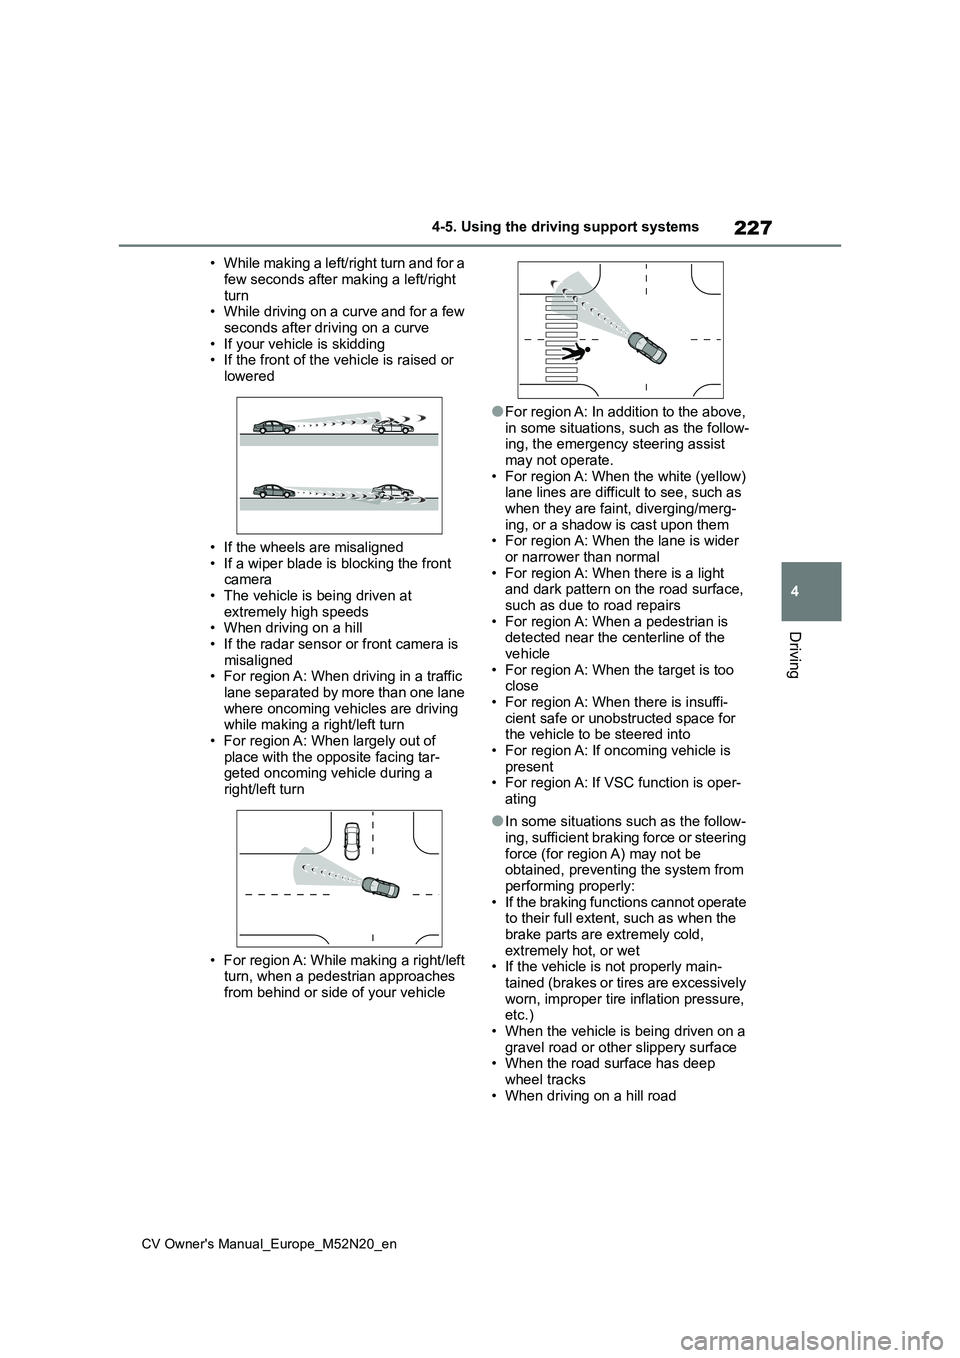 TOYOTA YARIS CROSS 2022  Owners Manual 227
4
CV Owner's Manual_Europe_M52N20_en
4-5. Using the driving support systems
Driving
• While making a left/right turn and for a  
few seconds after making a left/right  turn• While driving 